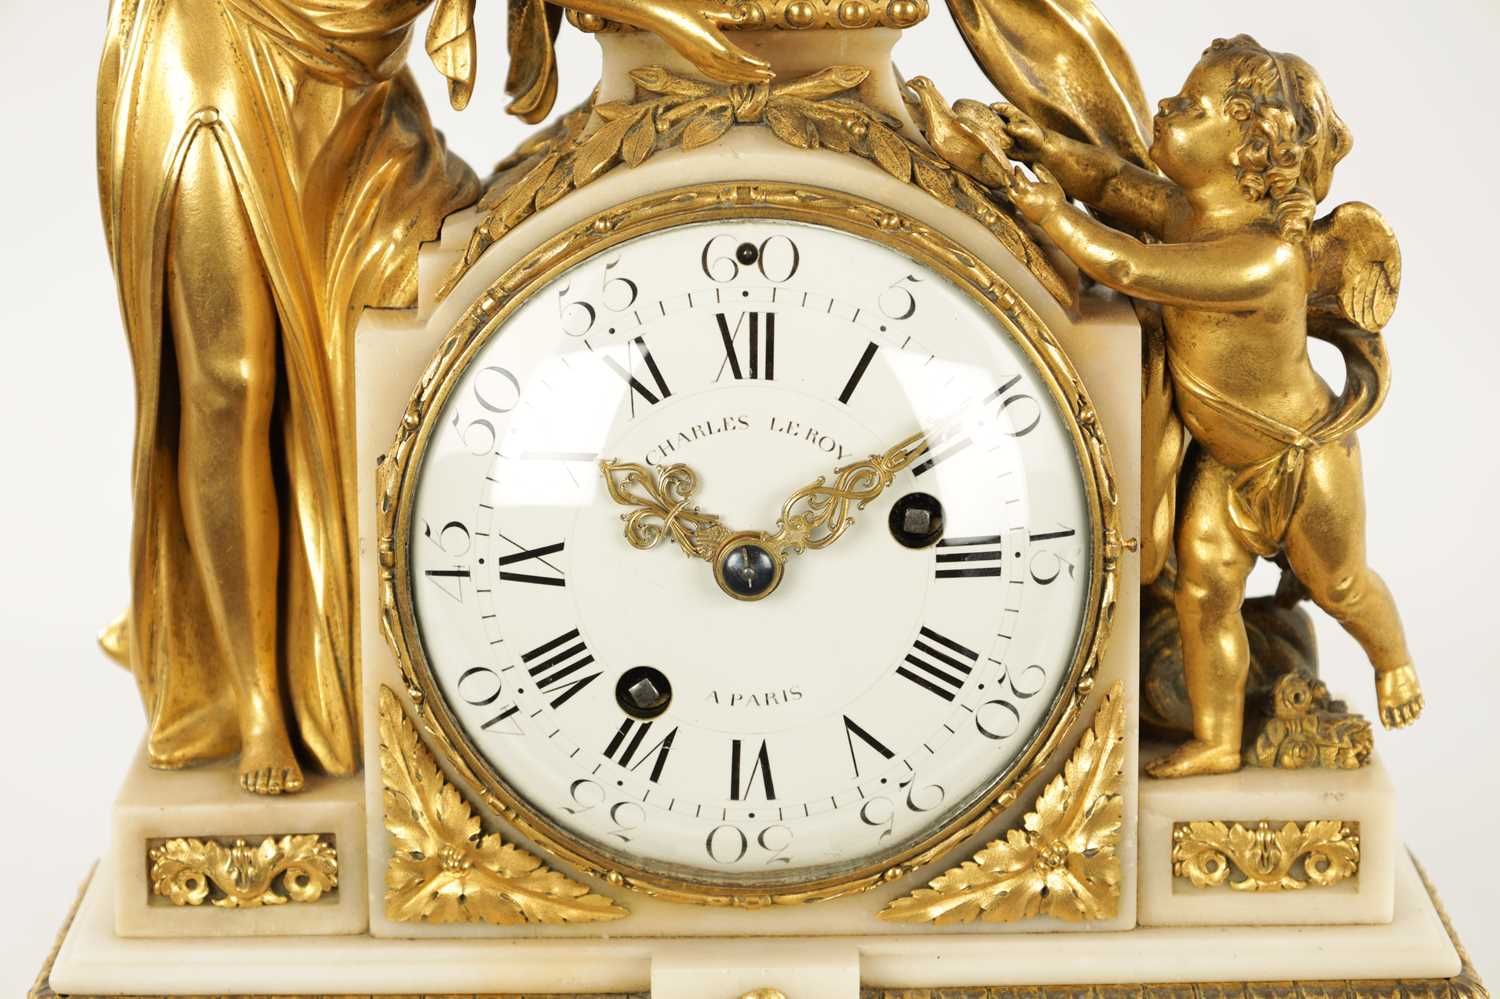 CHARLES LEROY, A PARIS. A FRENCH LOUIS XVI ORMOLU AND MARBLE FIGURAL MANTEL CLOCK - Image 5 of 11